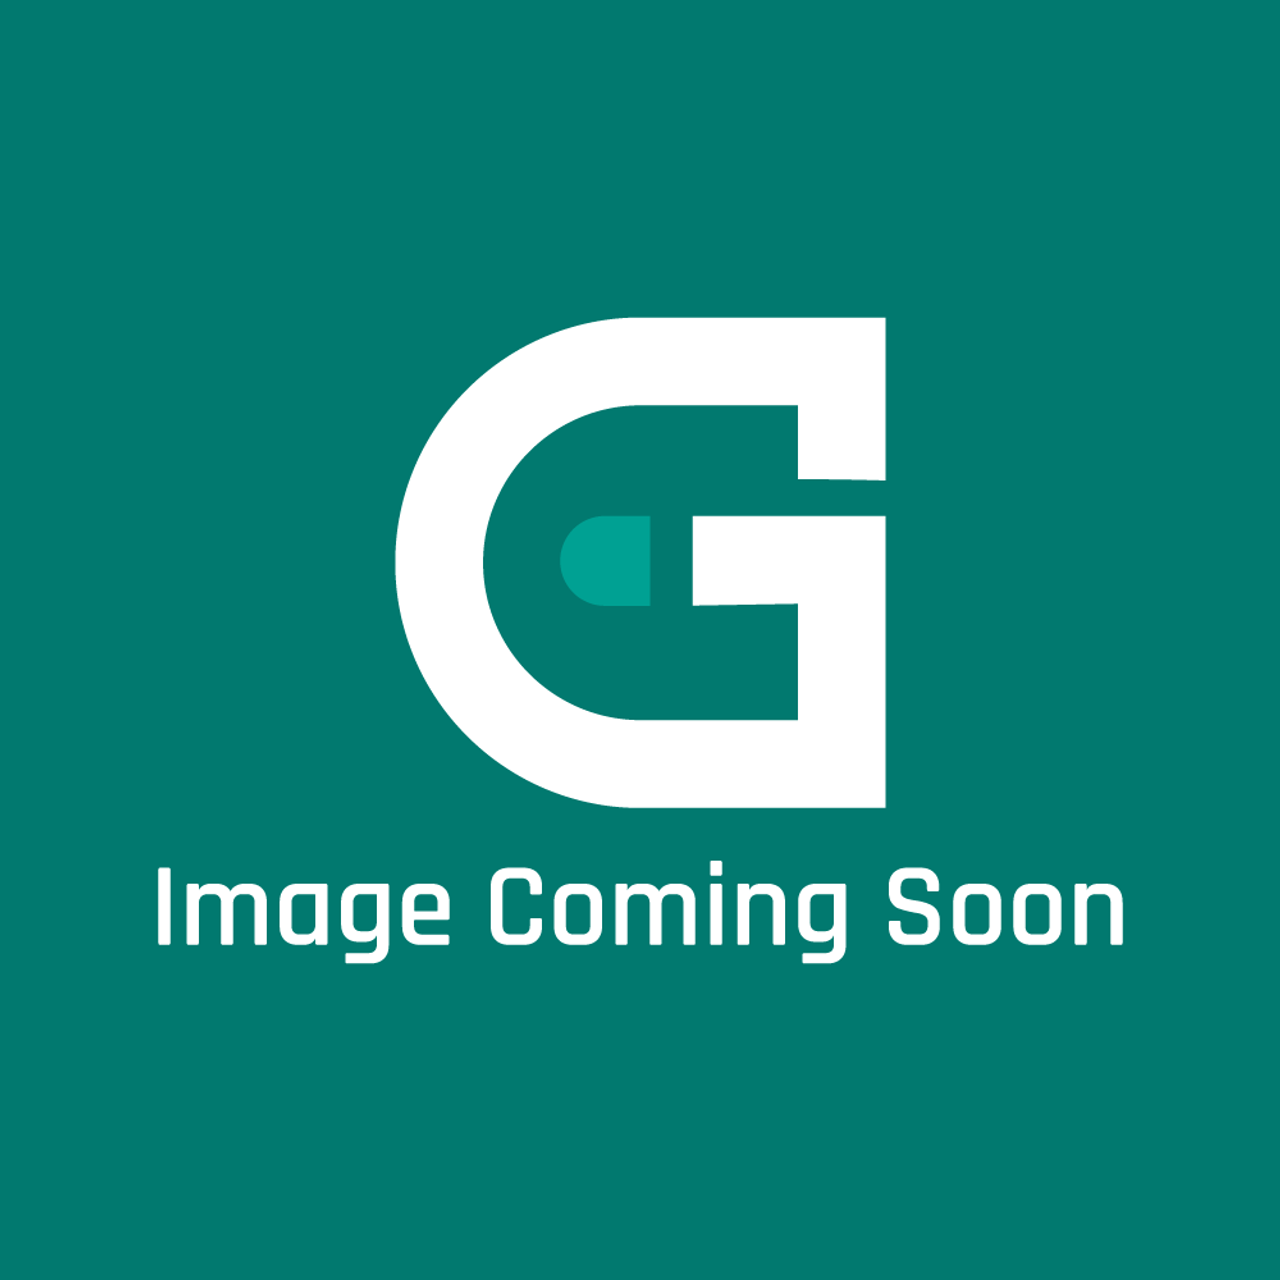 Frigidaire - Electrolux 5304482226 Chimney - Image Coming Soon!